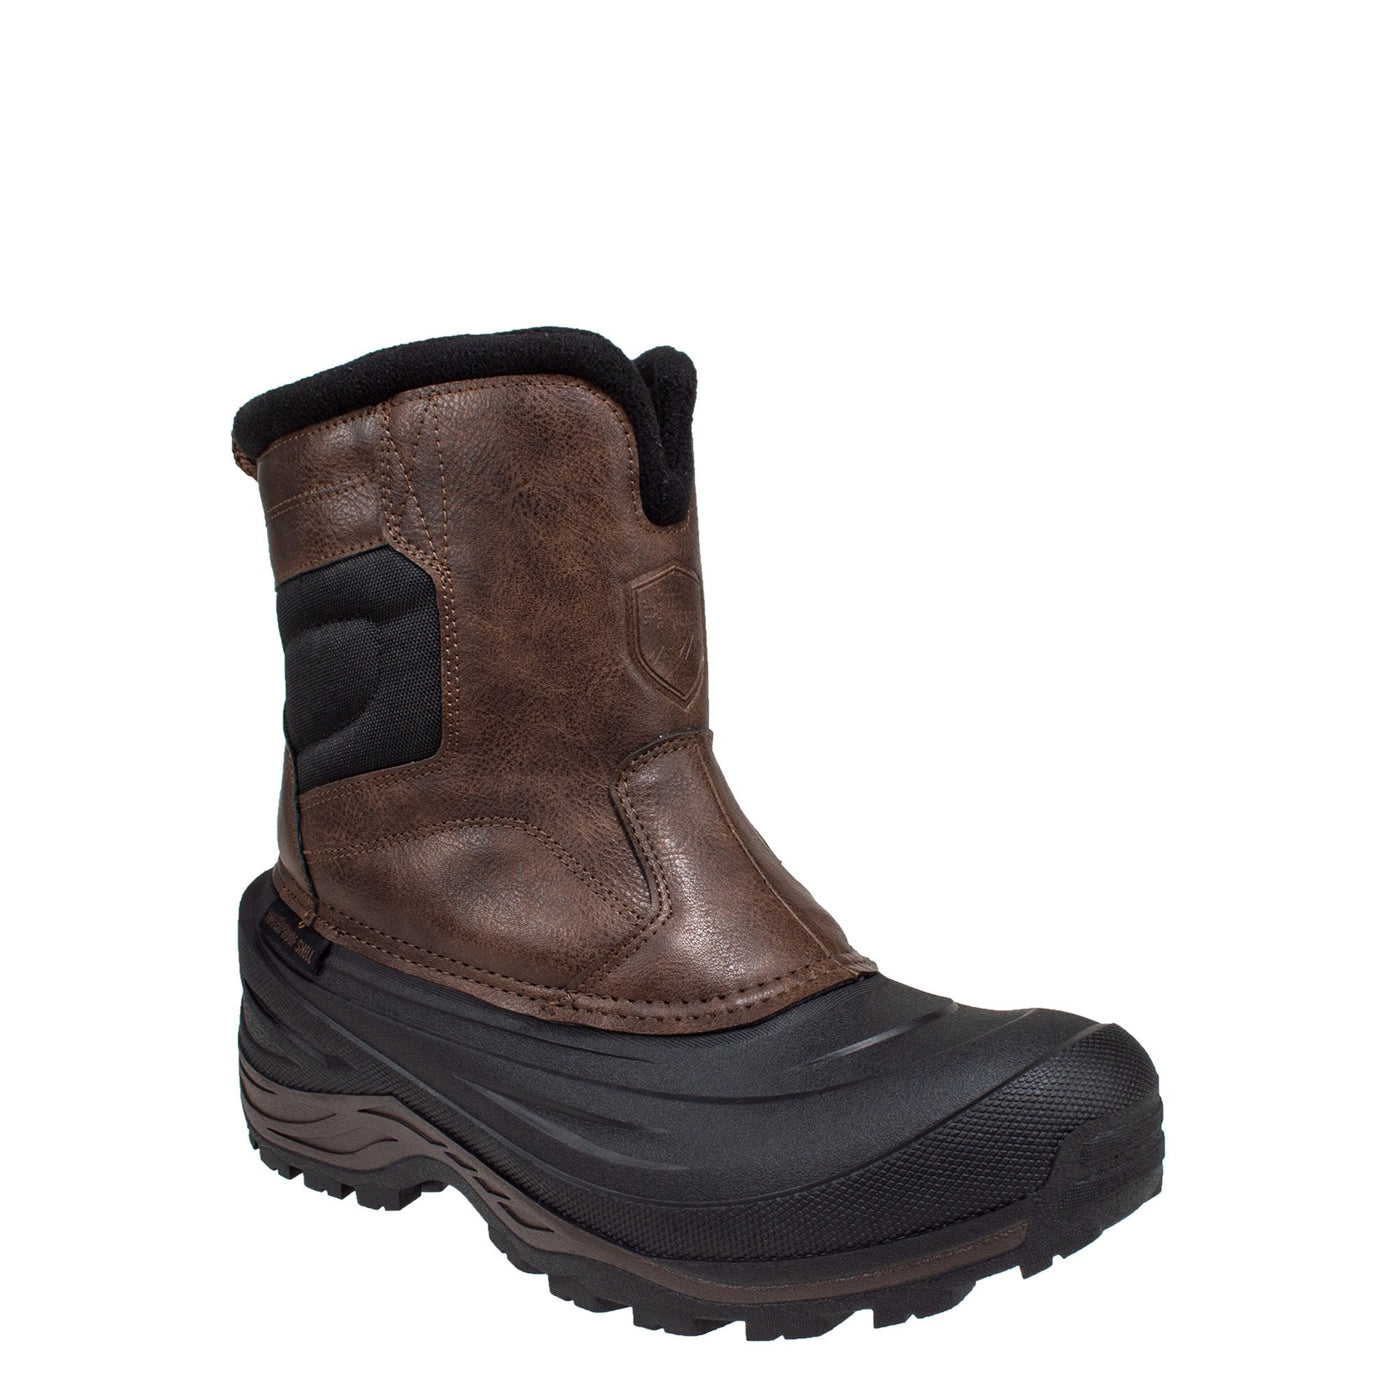 men's brown, vegan leather, inside zipper, mid height shell boot with Hydrostopper® anti-slip pods on the bottom of boot